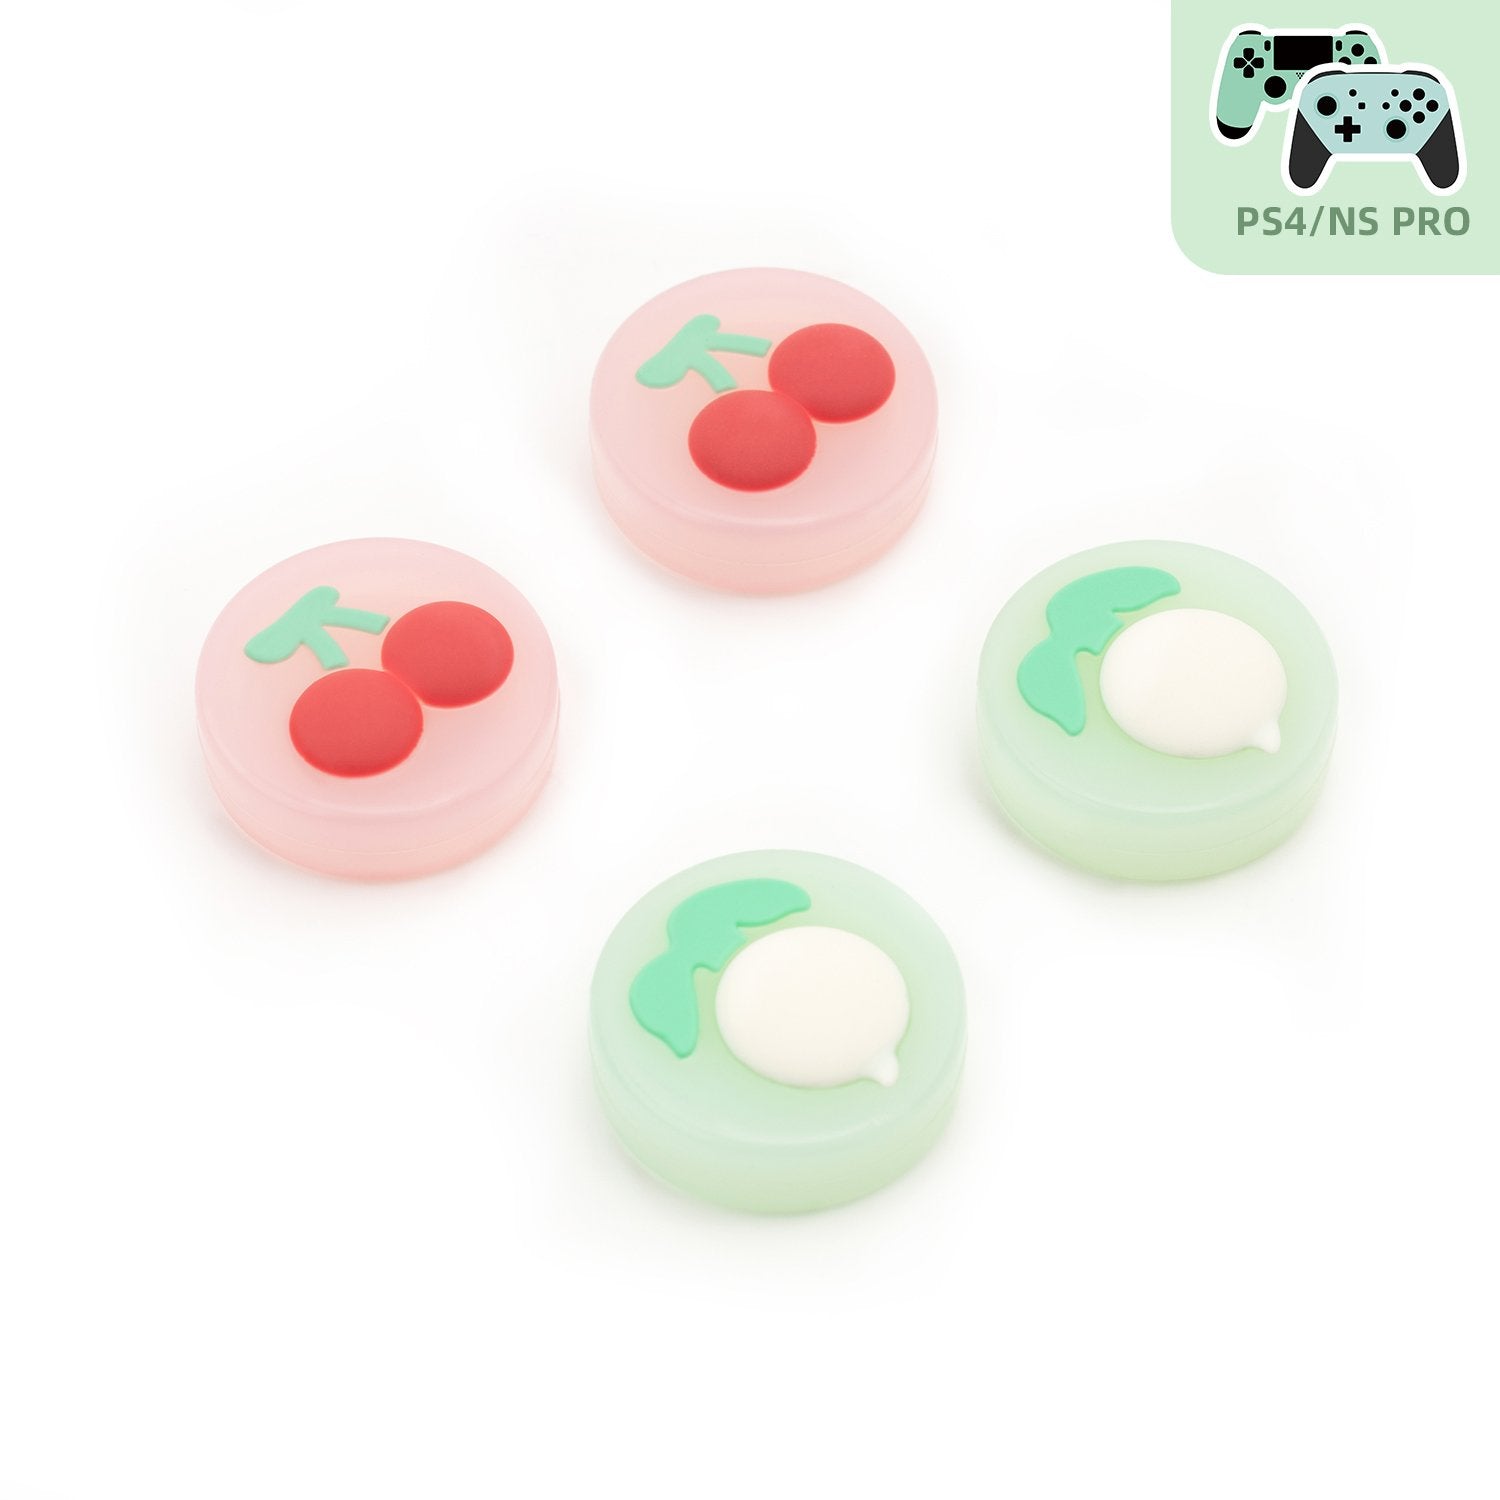 Cherry and Turnip - Pro Controller/Playstation Thumbcap Grips